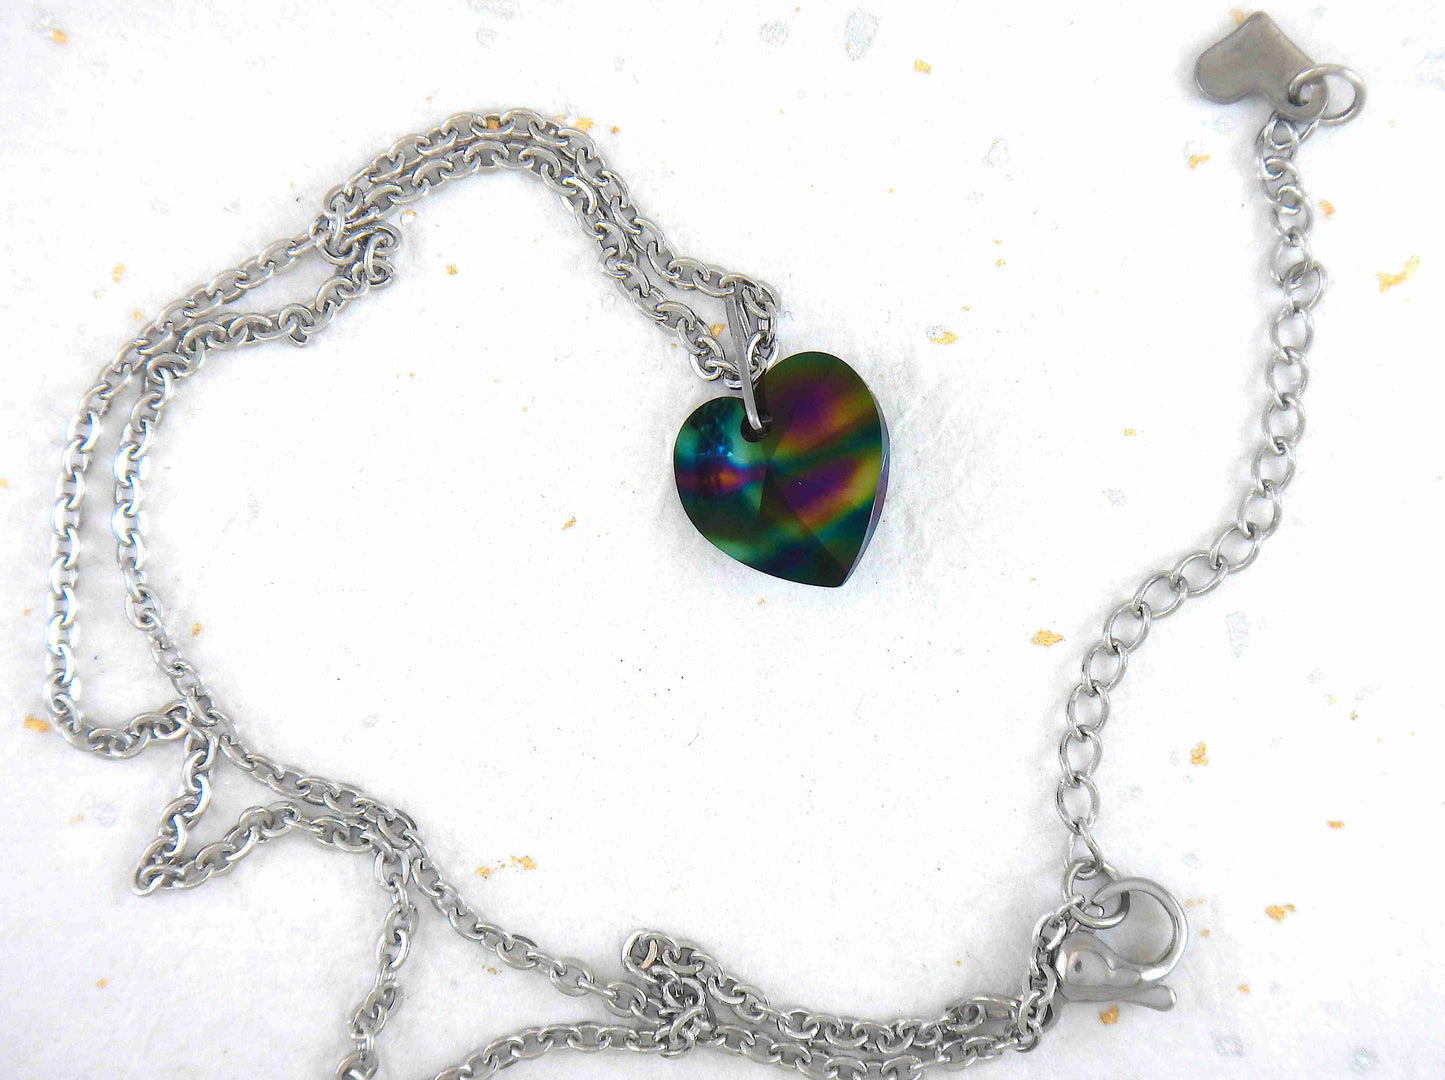 14/16-inch necklace with 14mm Dark Rainbow faceted Swarovski crystal heart pendant, stainless steel chain